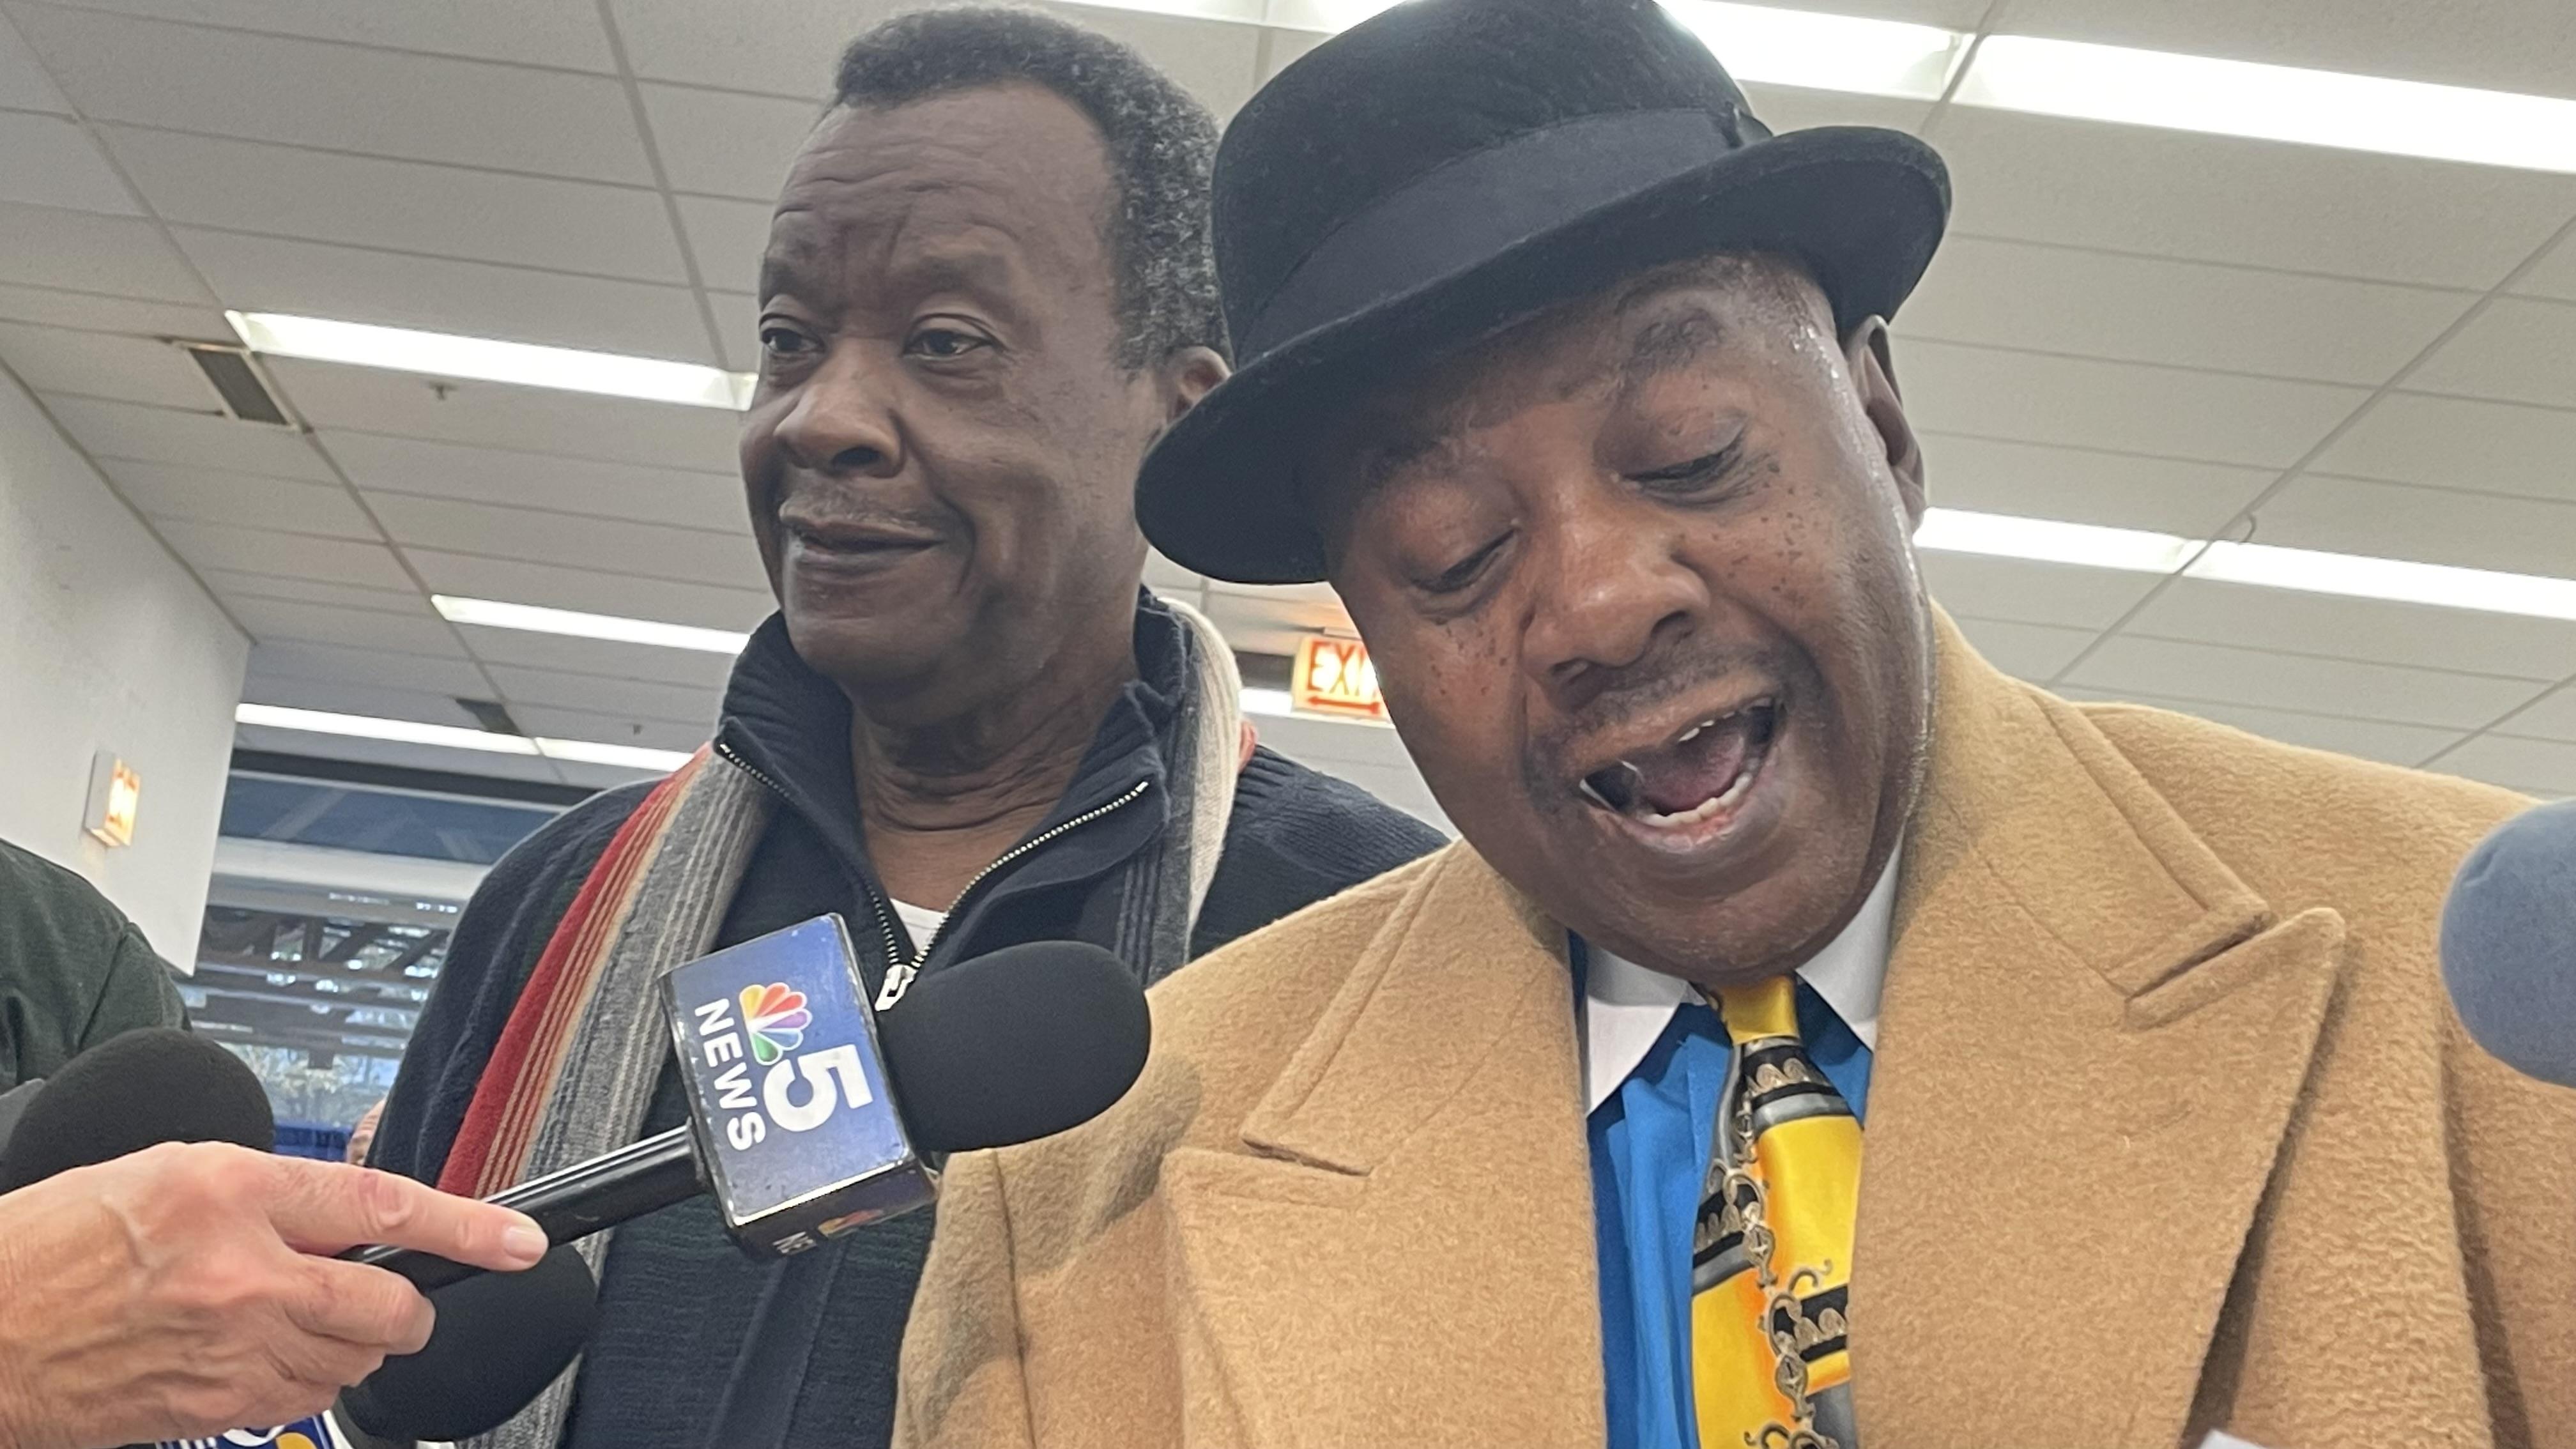 As mayoral candidate Willie Wilson looks on, former state Sen. Rickey Hendon tells reporters why he challenged Ja'Mal Green's nominating petitions. (Heather Cherone/WTTW News)